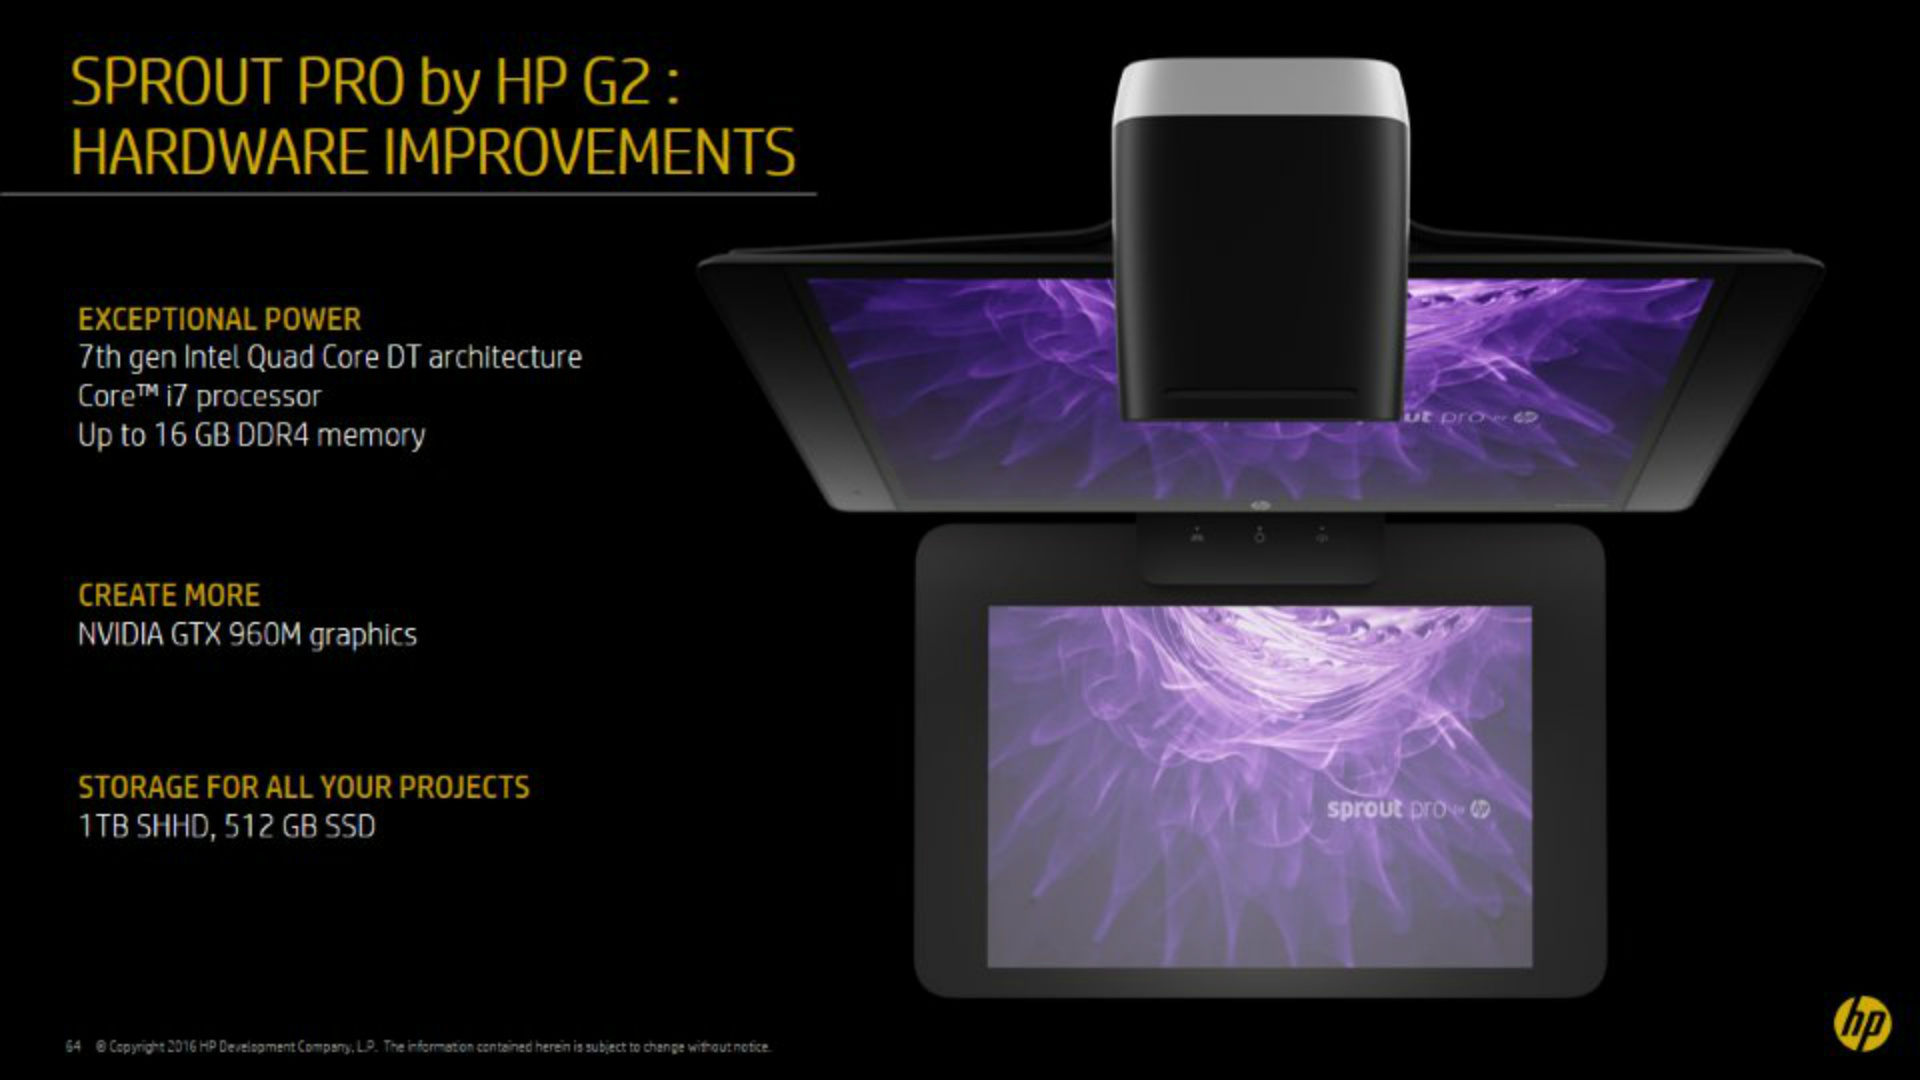 HP Sprout Pro G2